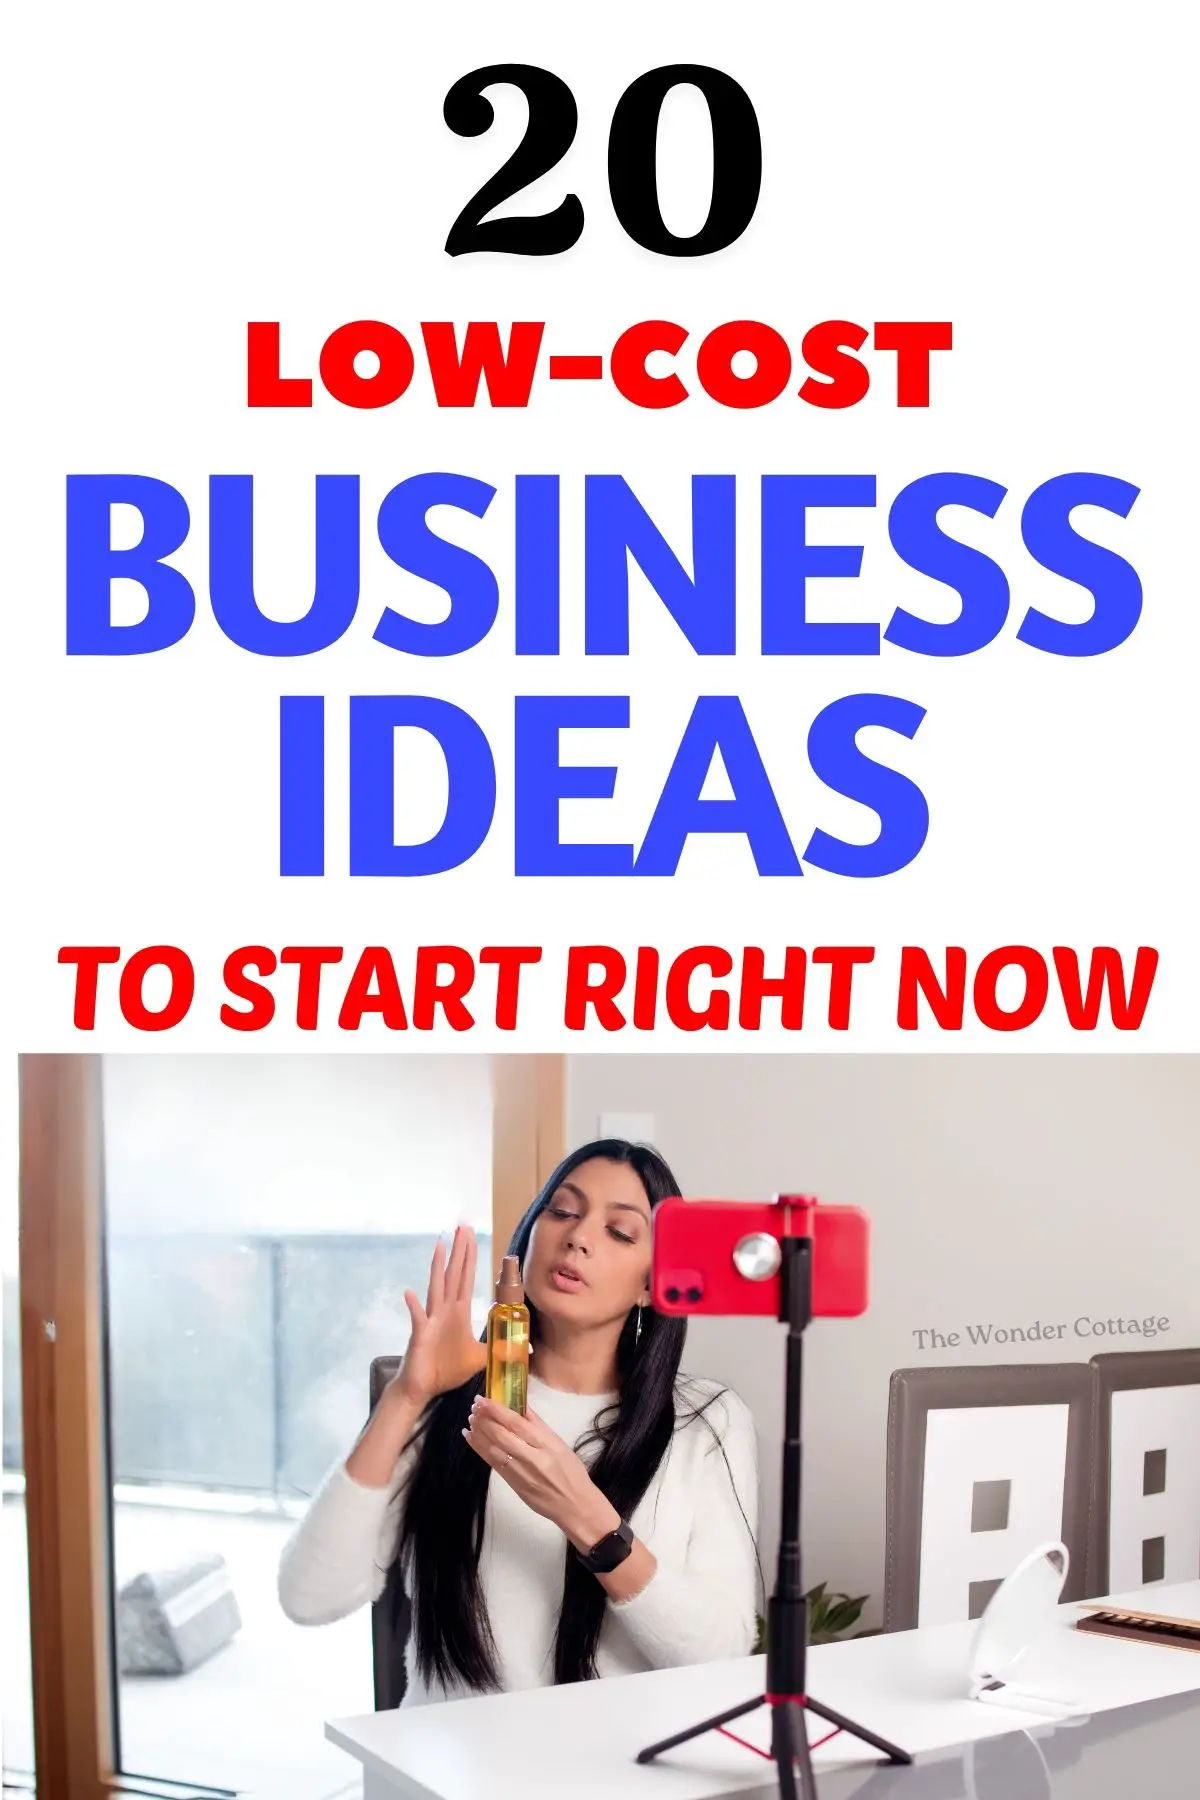 20 Low-Cost Business Ideas To Start Right Now